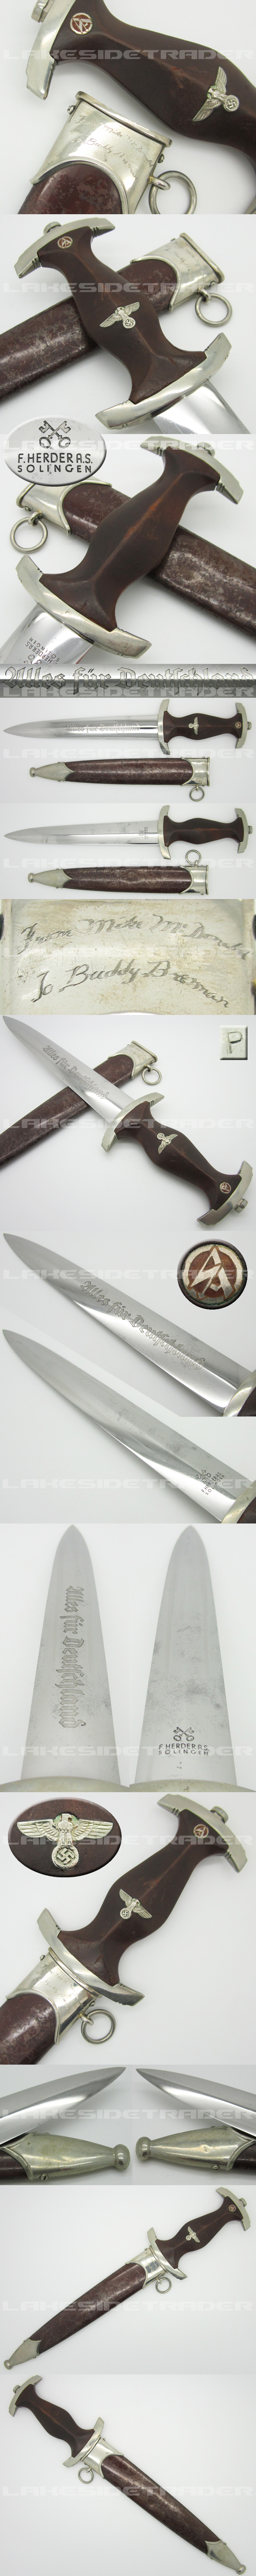 Personalized Early SA Dagger by F. Herder